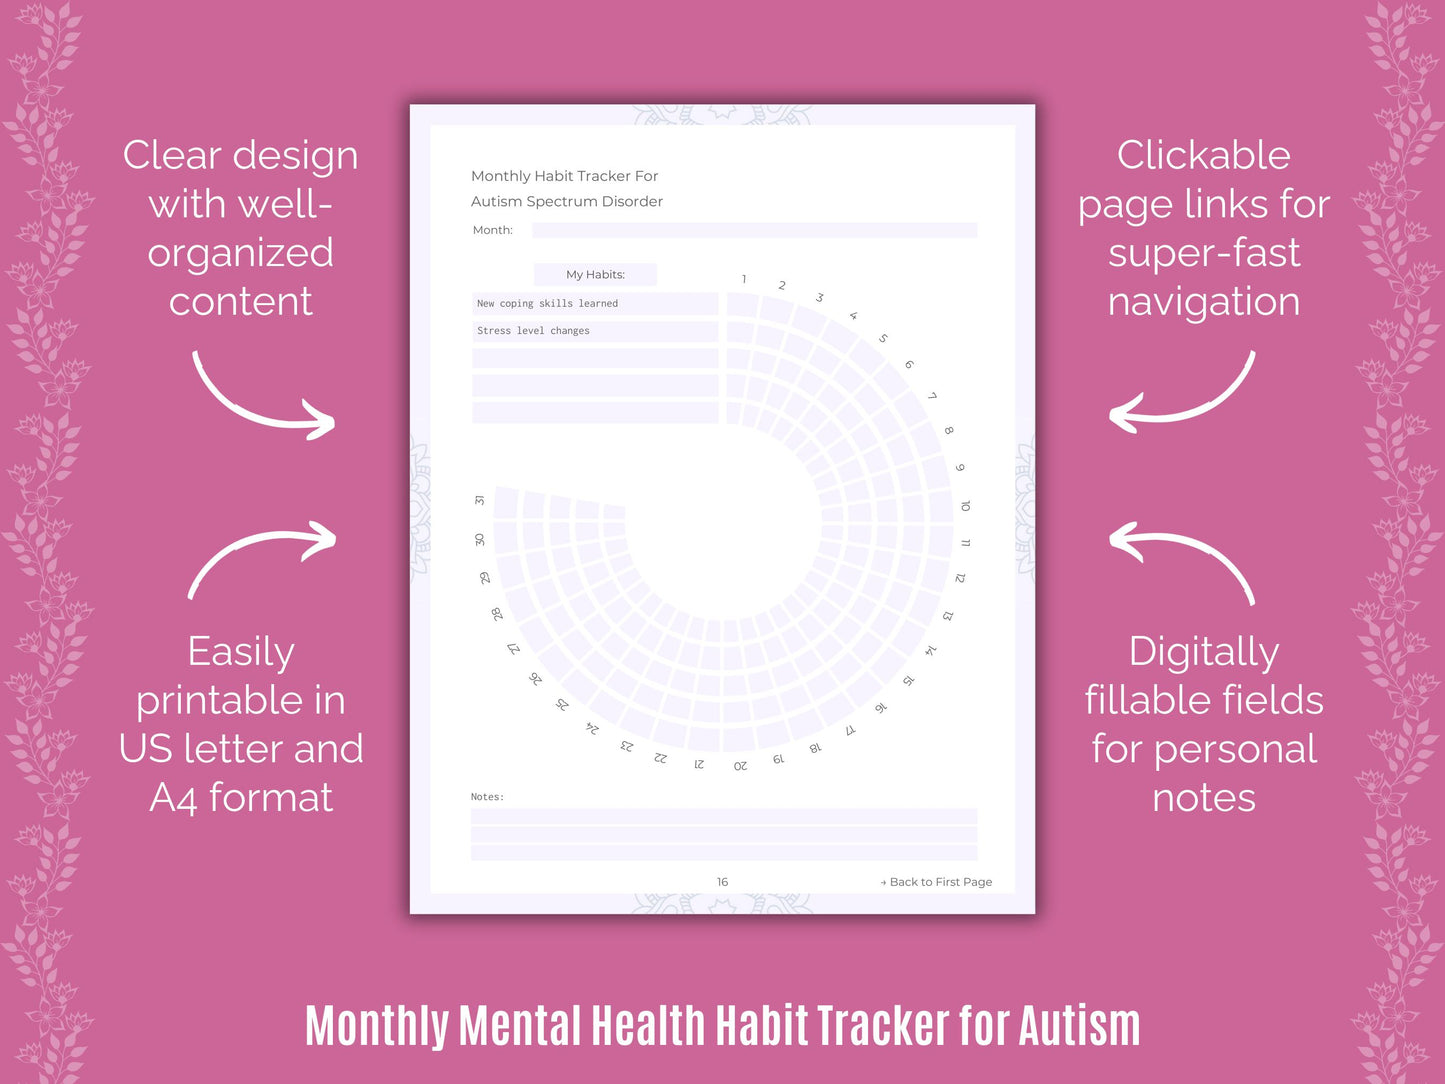 Autism Spectrum Disorder Mental Health, Templates, Goal Setting, Therapy, Notes, Cheat Sheet, Tools, Planners, Workbooks, Resources, Counseling, Journals, Journaling